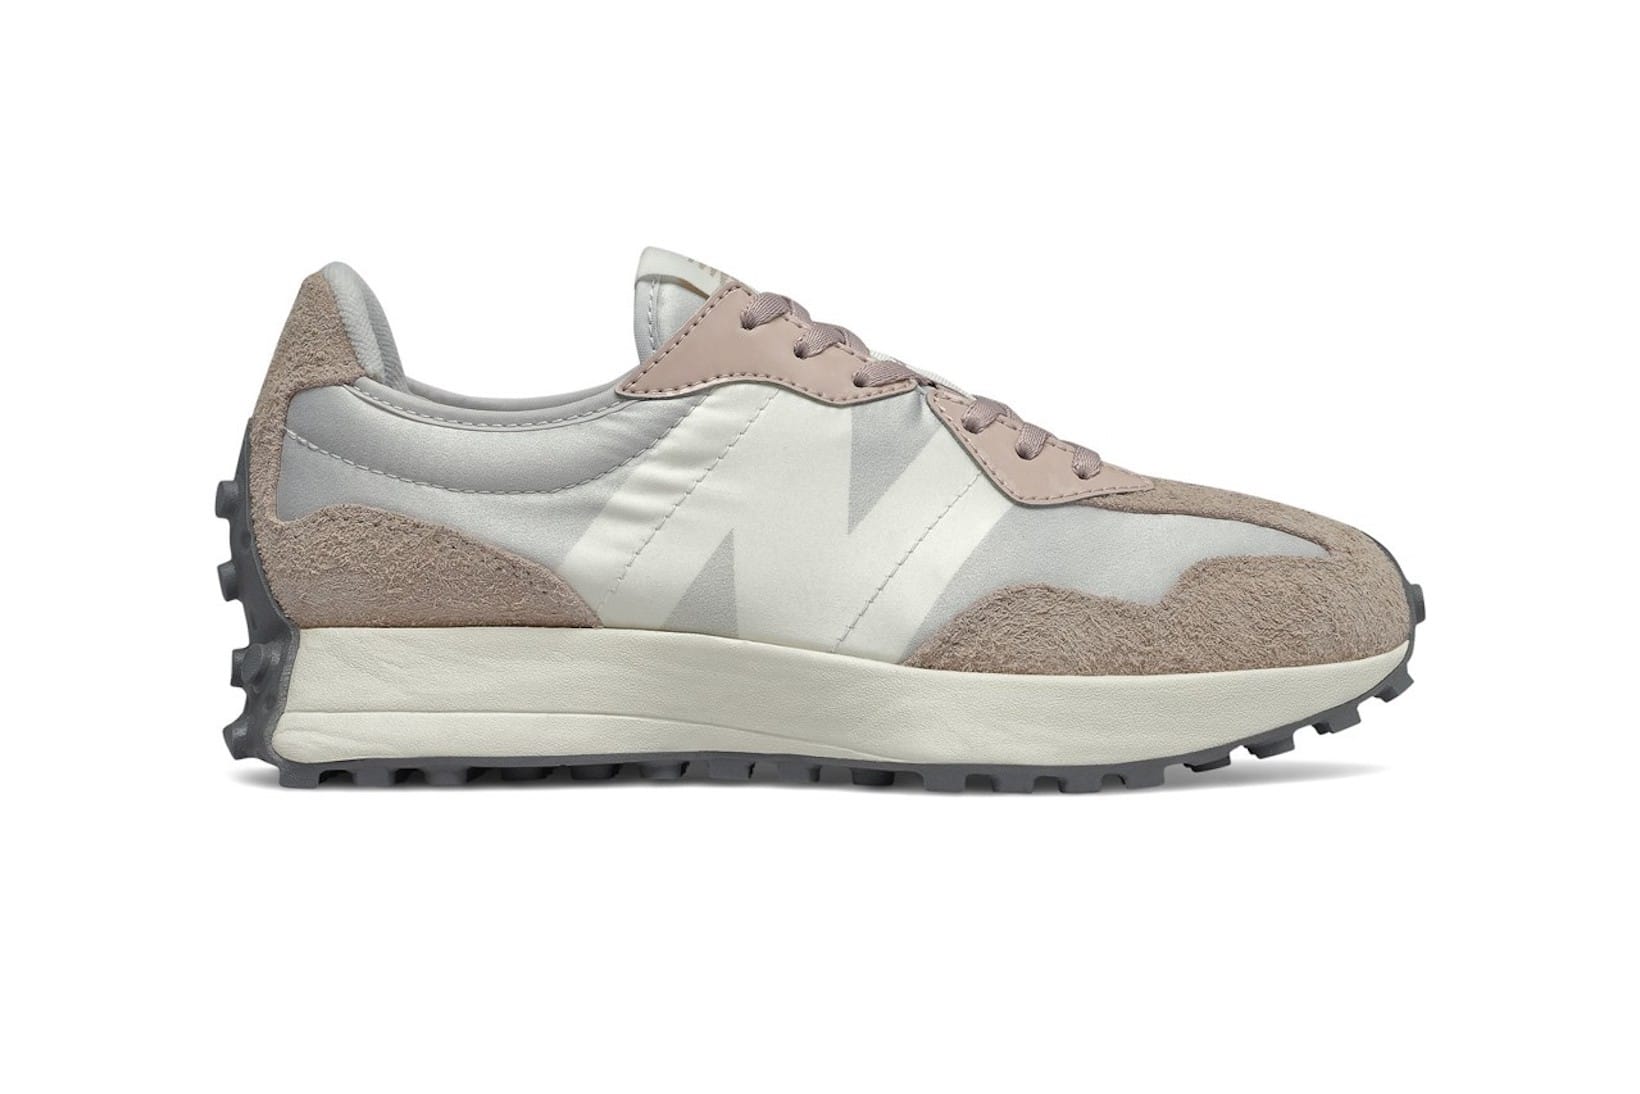 New Balance 327 Nude Pink/Black Colorway Release | HYPEBAE